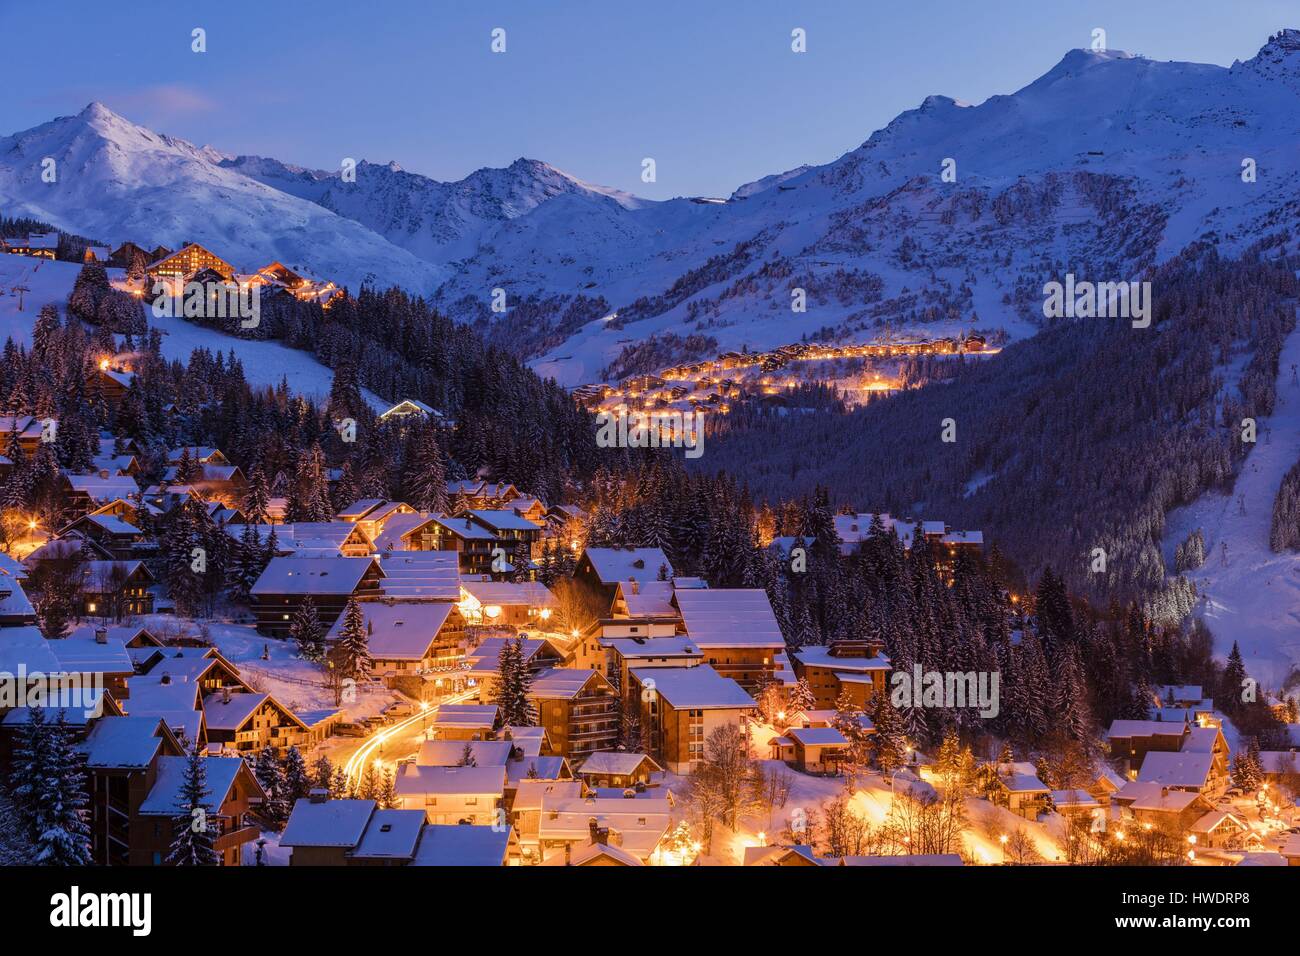 France, Savoie, Tarentaise valley, Meribel is one of the largest skiresort  village in France, in the heart of Les Trois Vallees (The Three Valleys),  one of the biggest ski areas in the